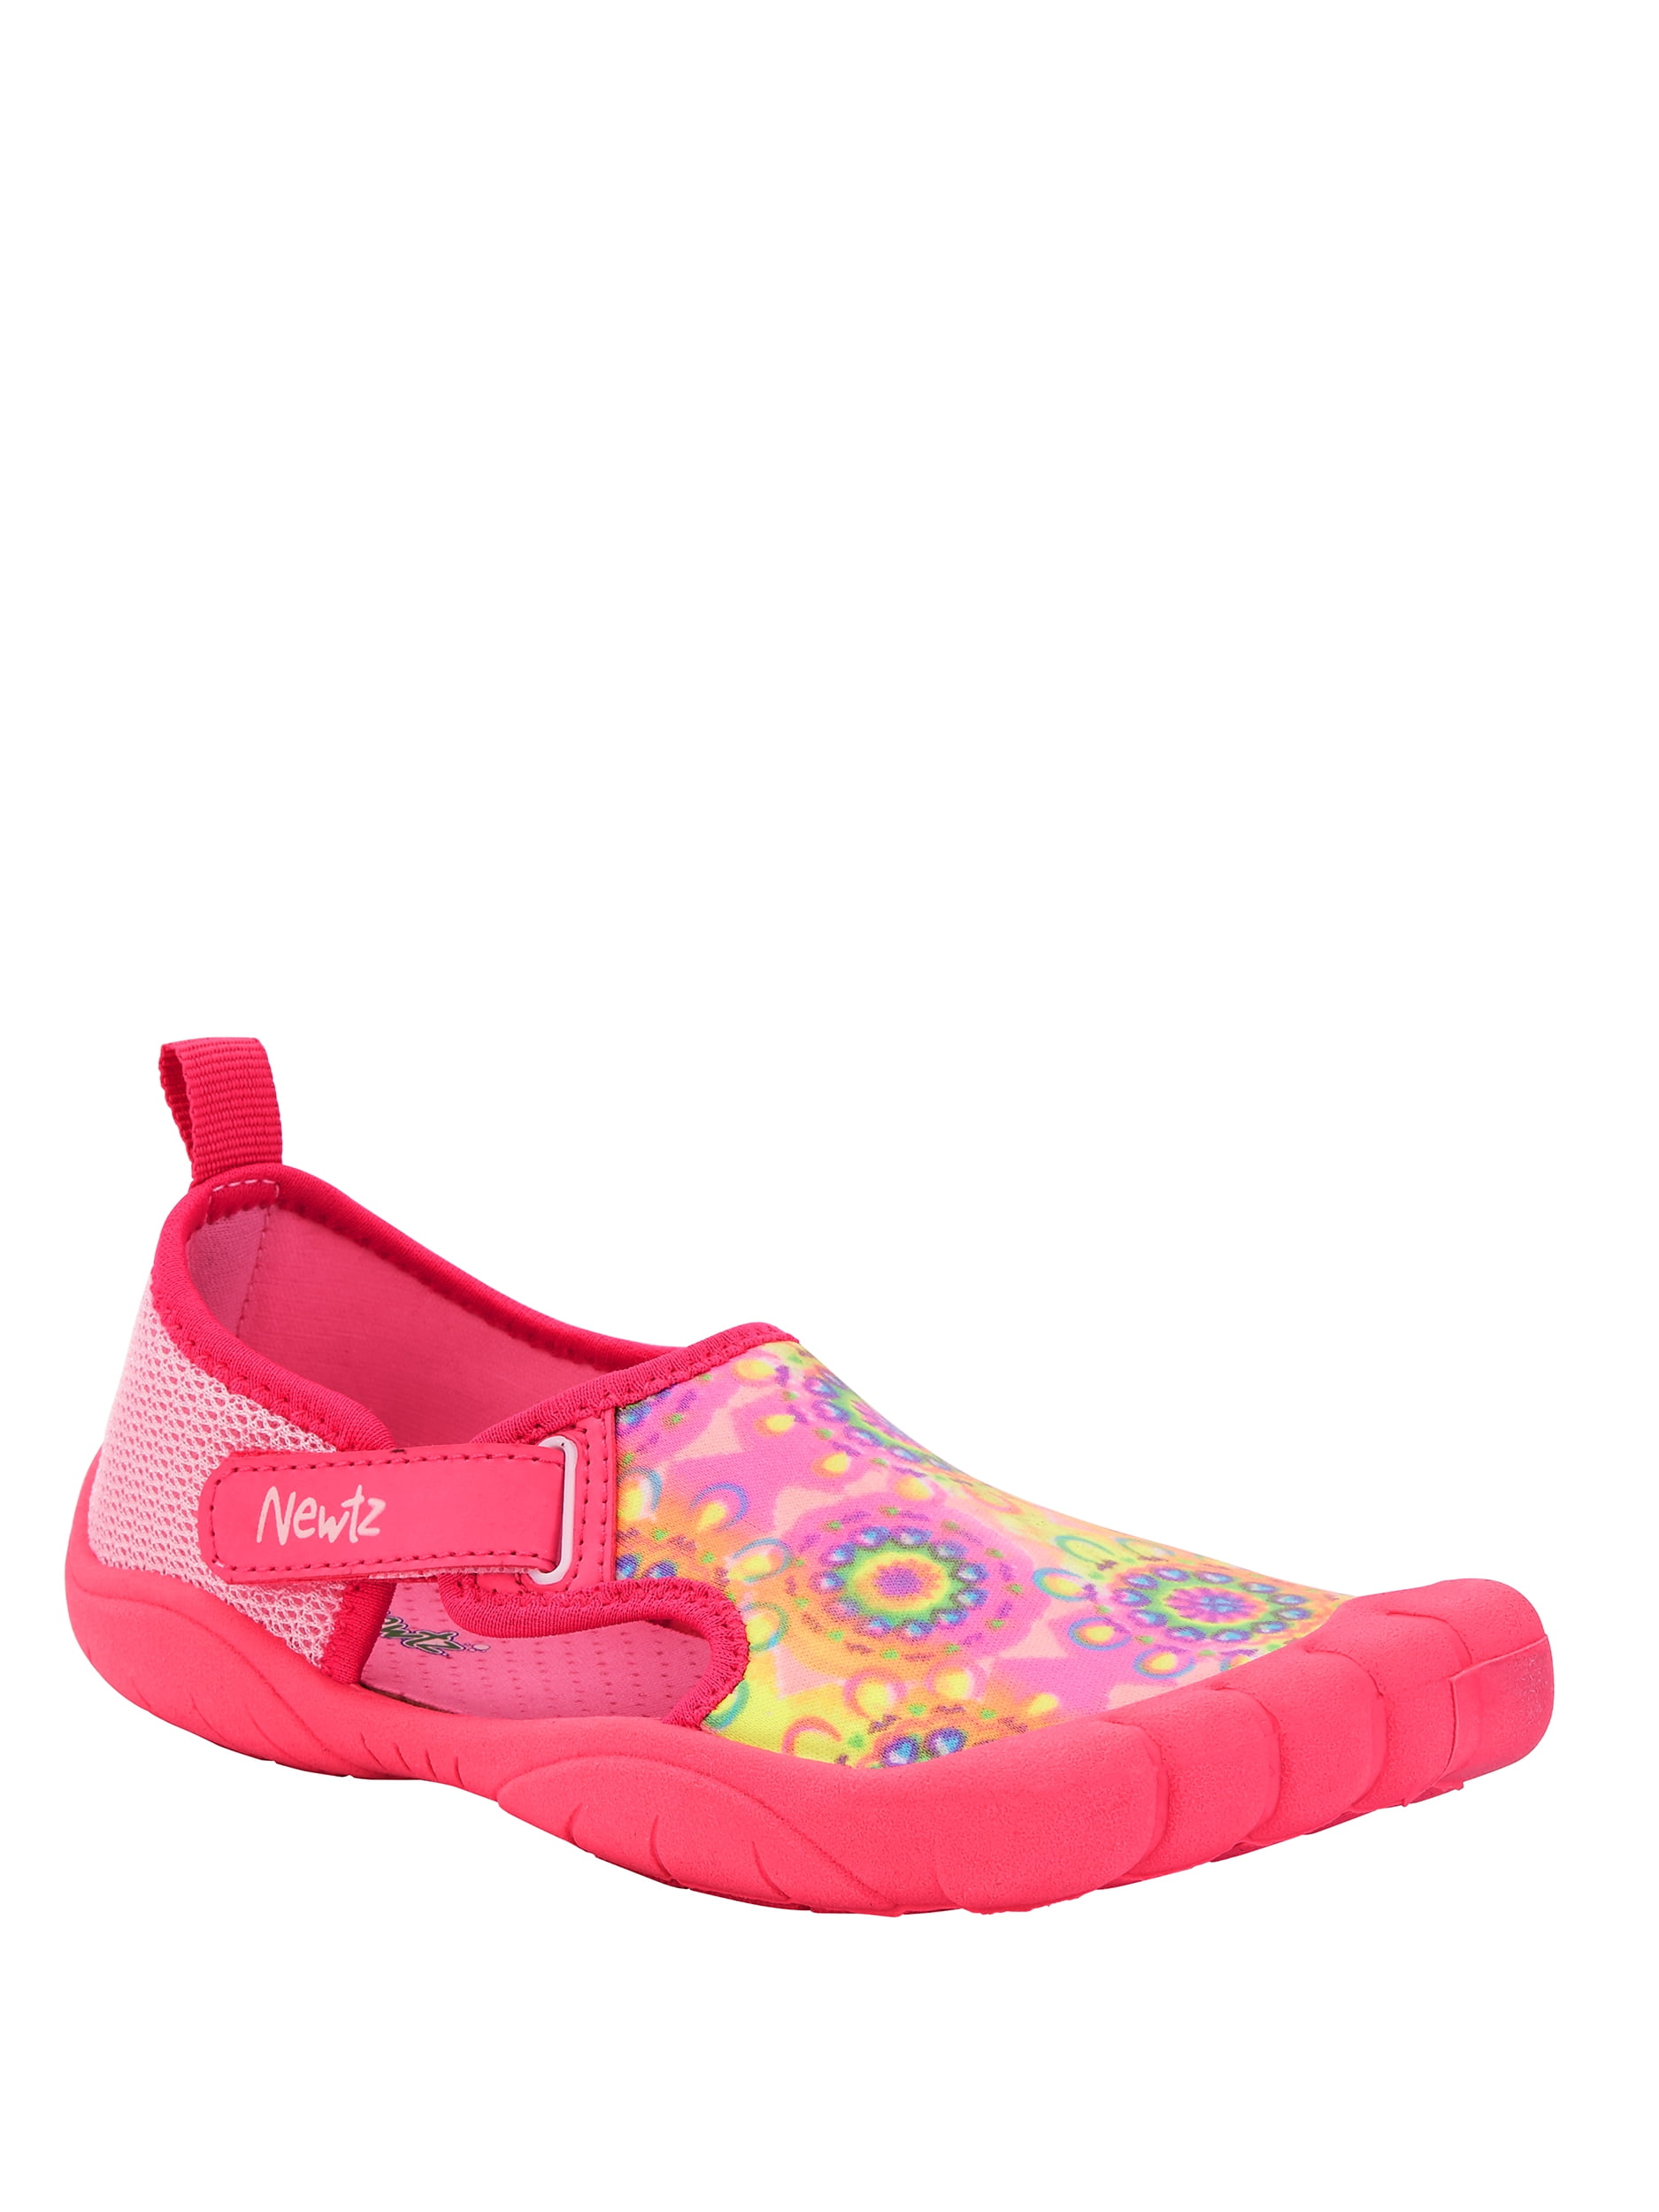 water shoes for kids walmart